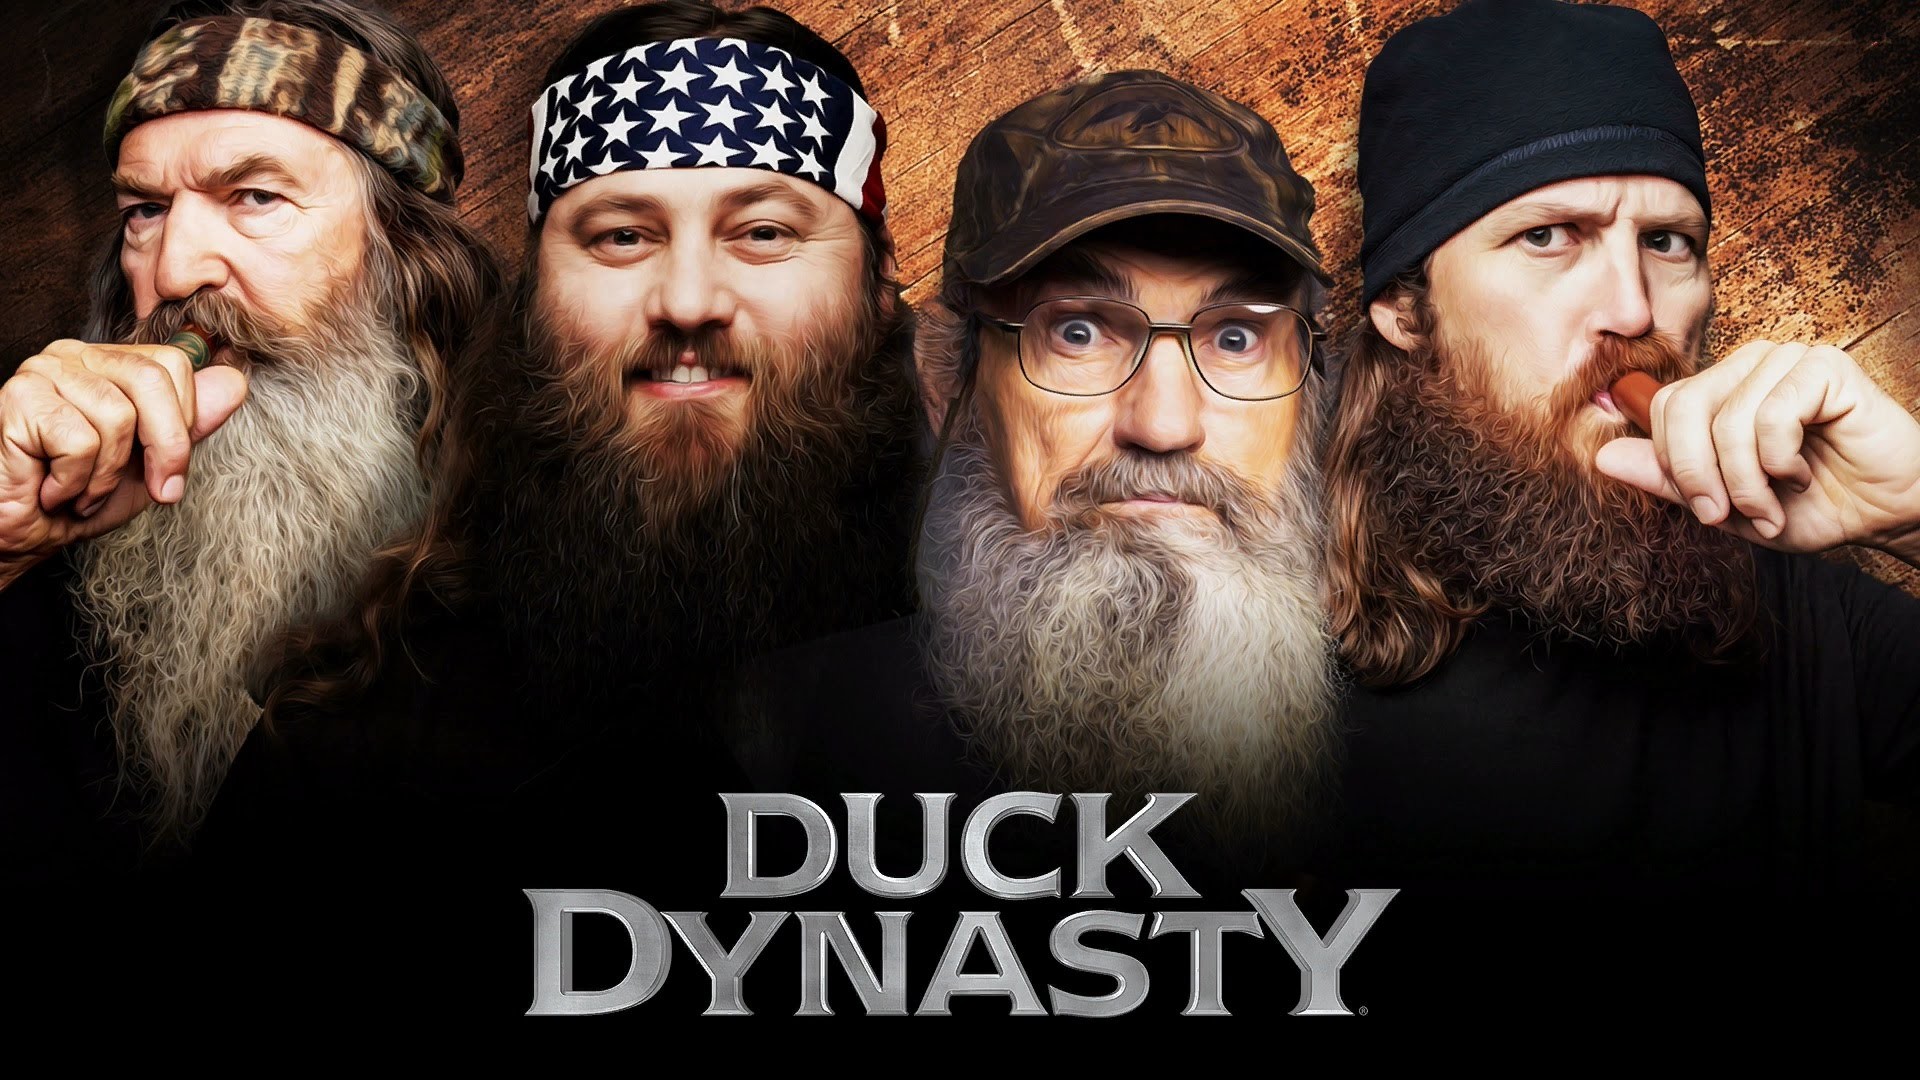 Duck Dynasty – PS4 gameplay 1080p60 â